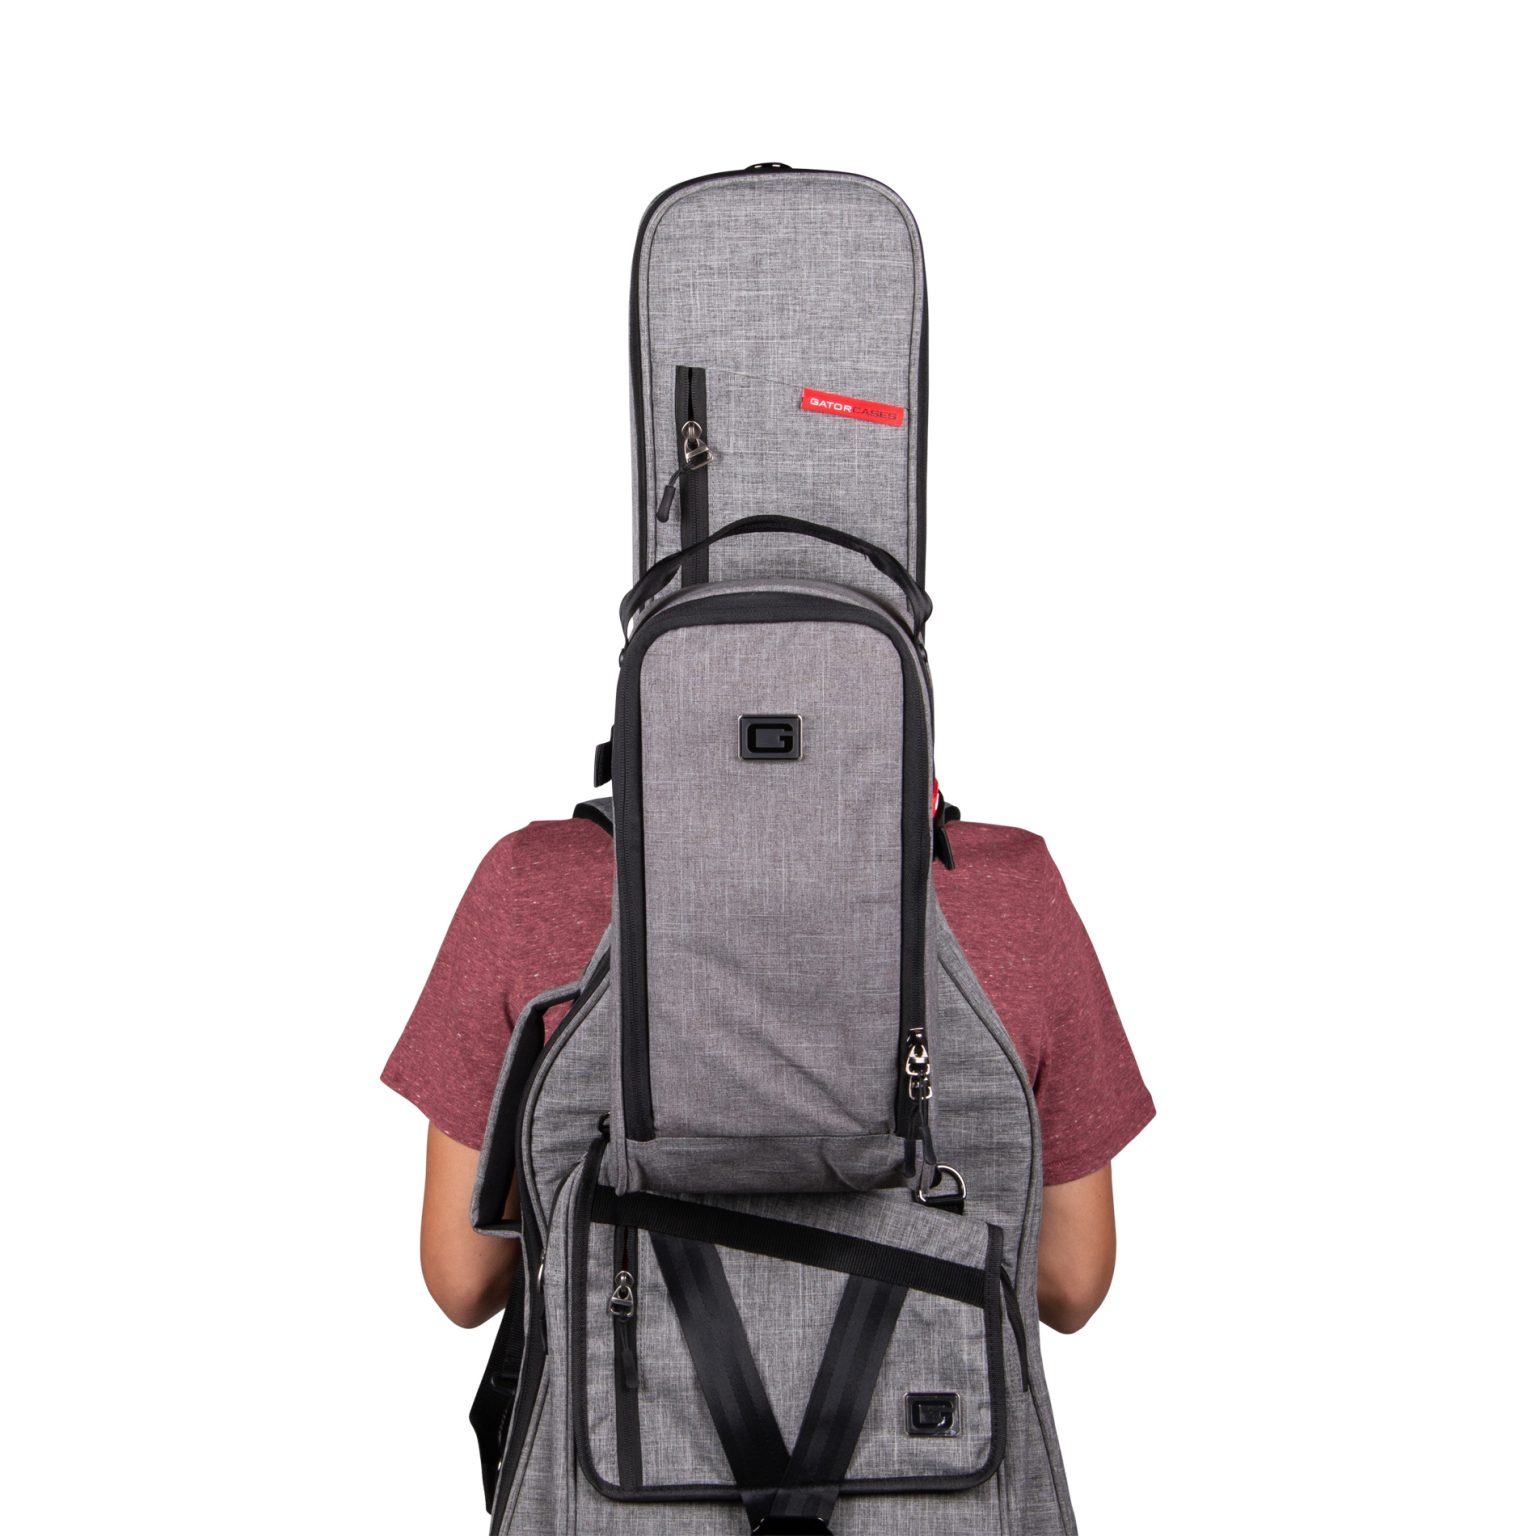 GT-1407GRY Add-On Accessory Bag For Transit Series Bags